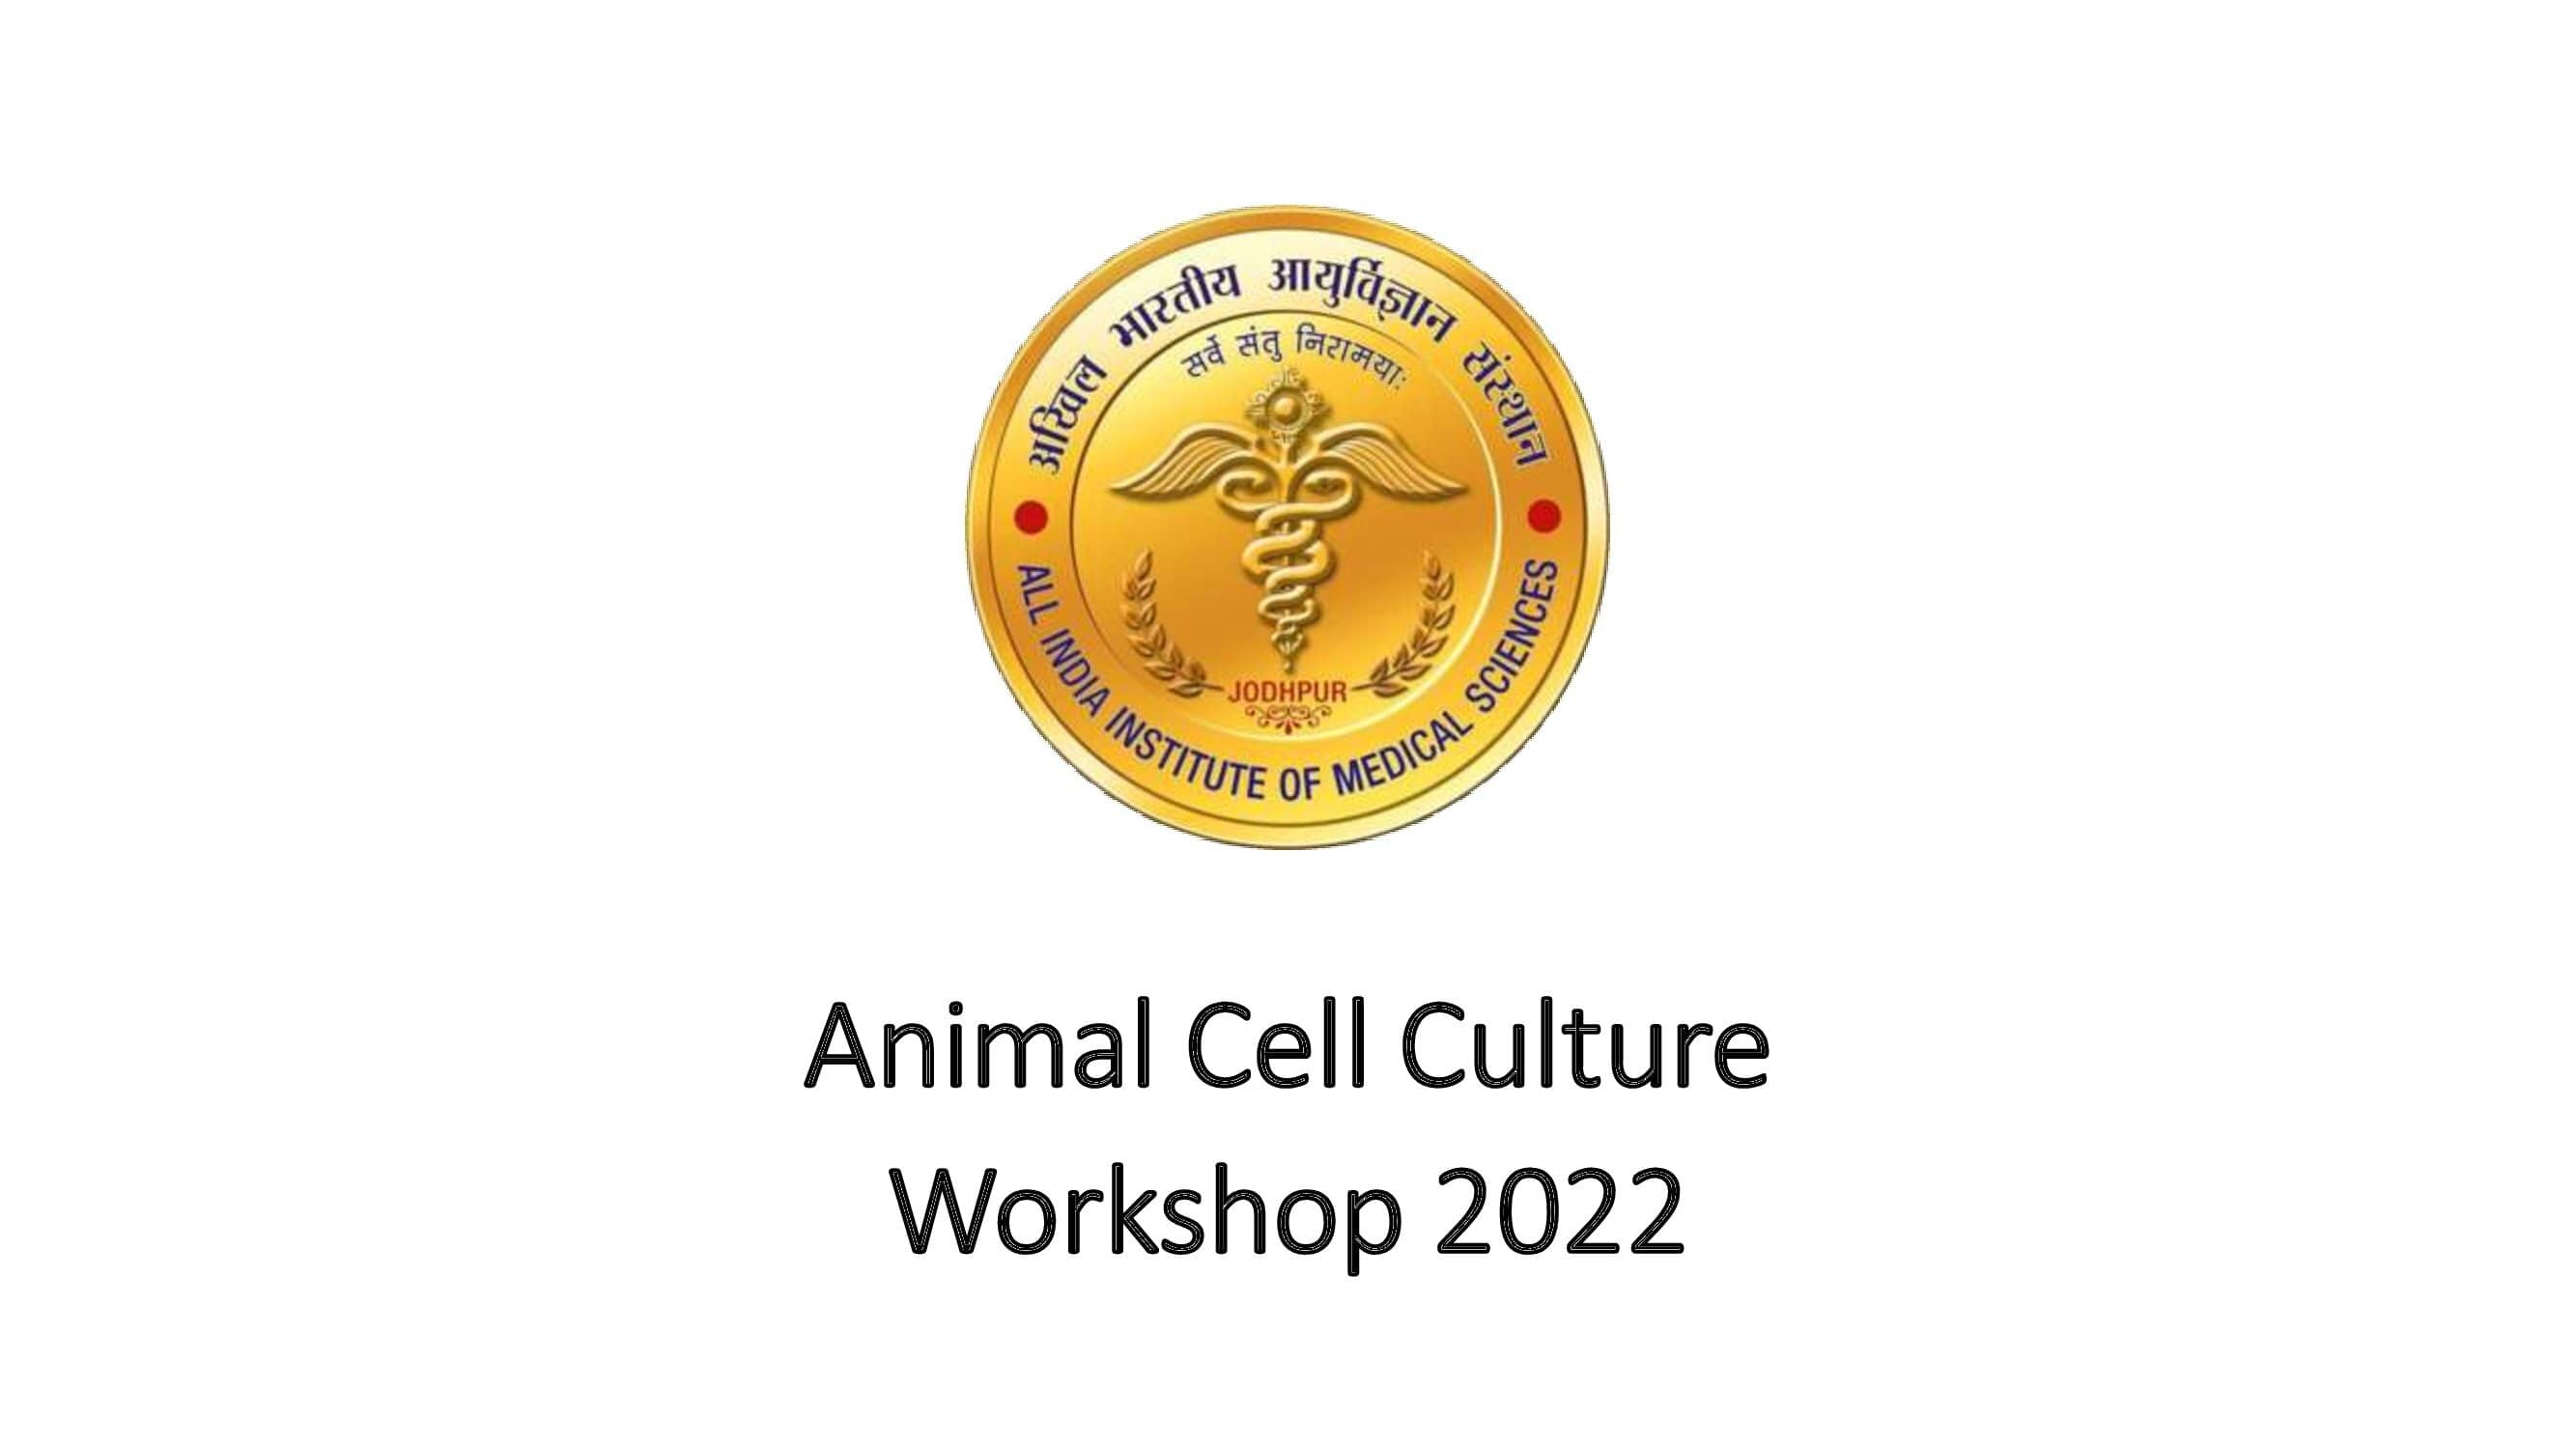 Animal Cell Culture Workshop: 2022